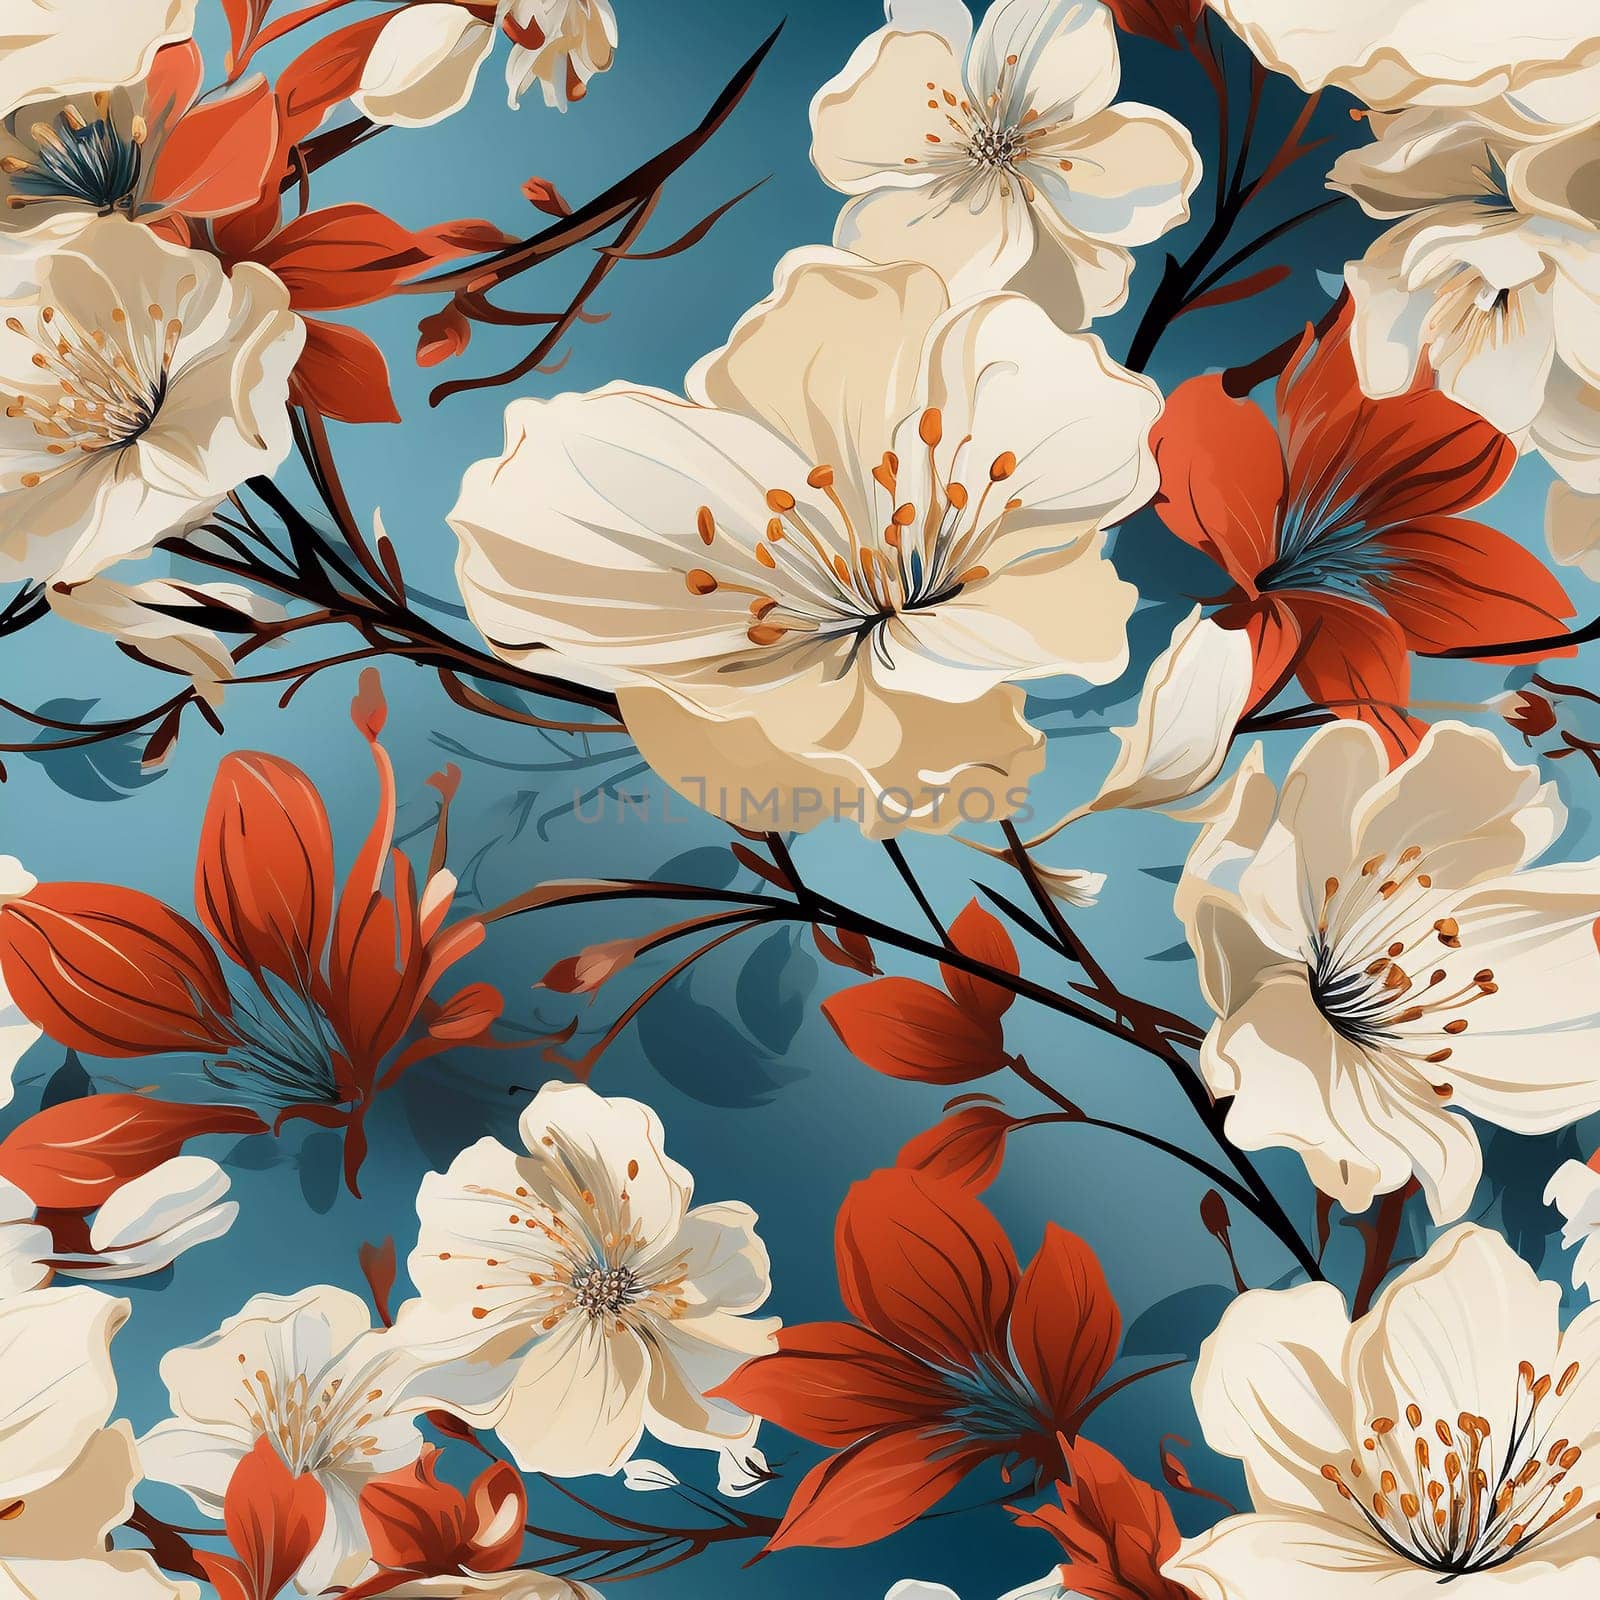 Seamless pattern tile background flowers and floral leaves plants. High quality photo